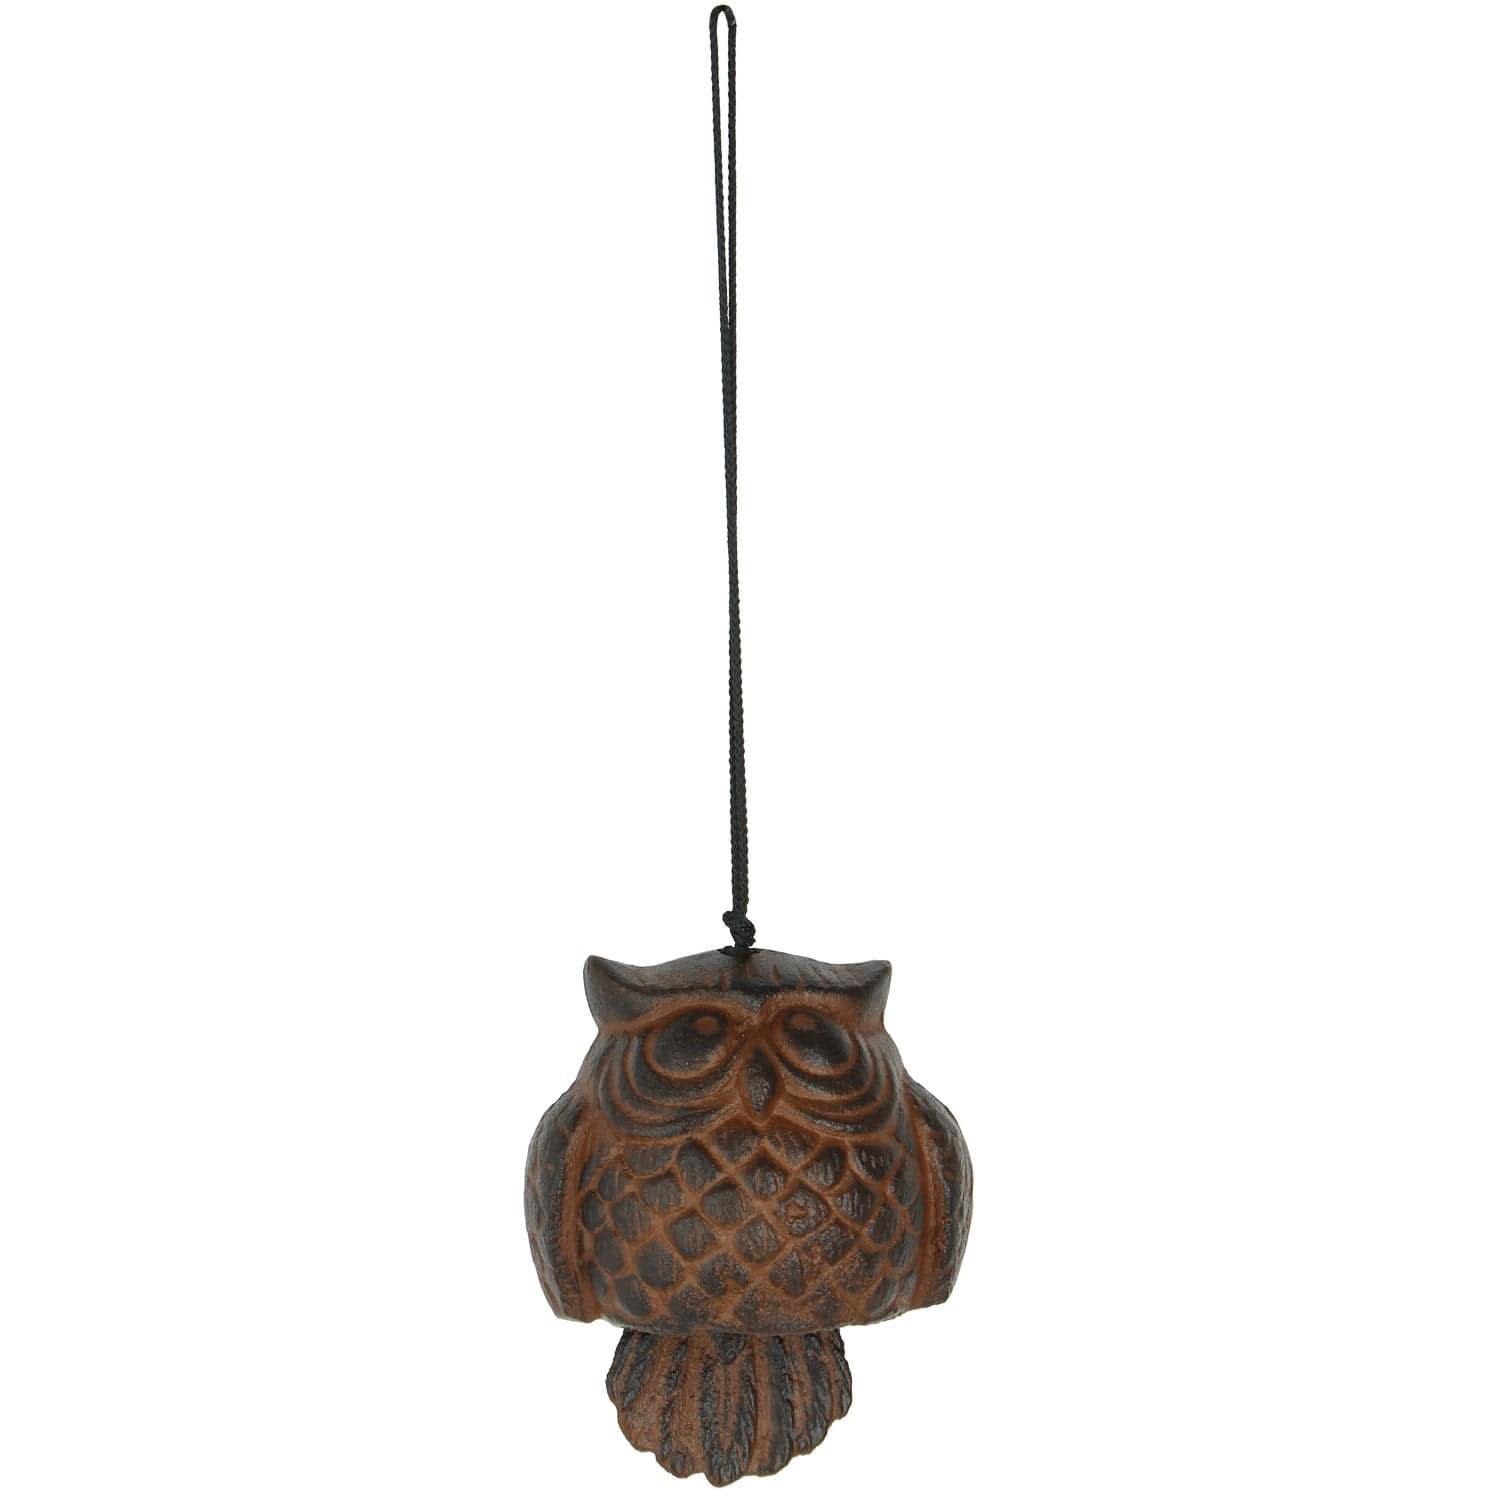 Acorn and Owl Windbells-Woodstock Chimes Habitat Collection - The Pink Pigs, Animal Lover's Boutique